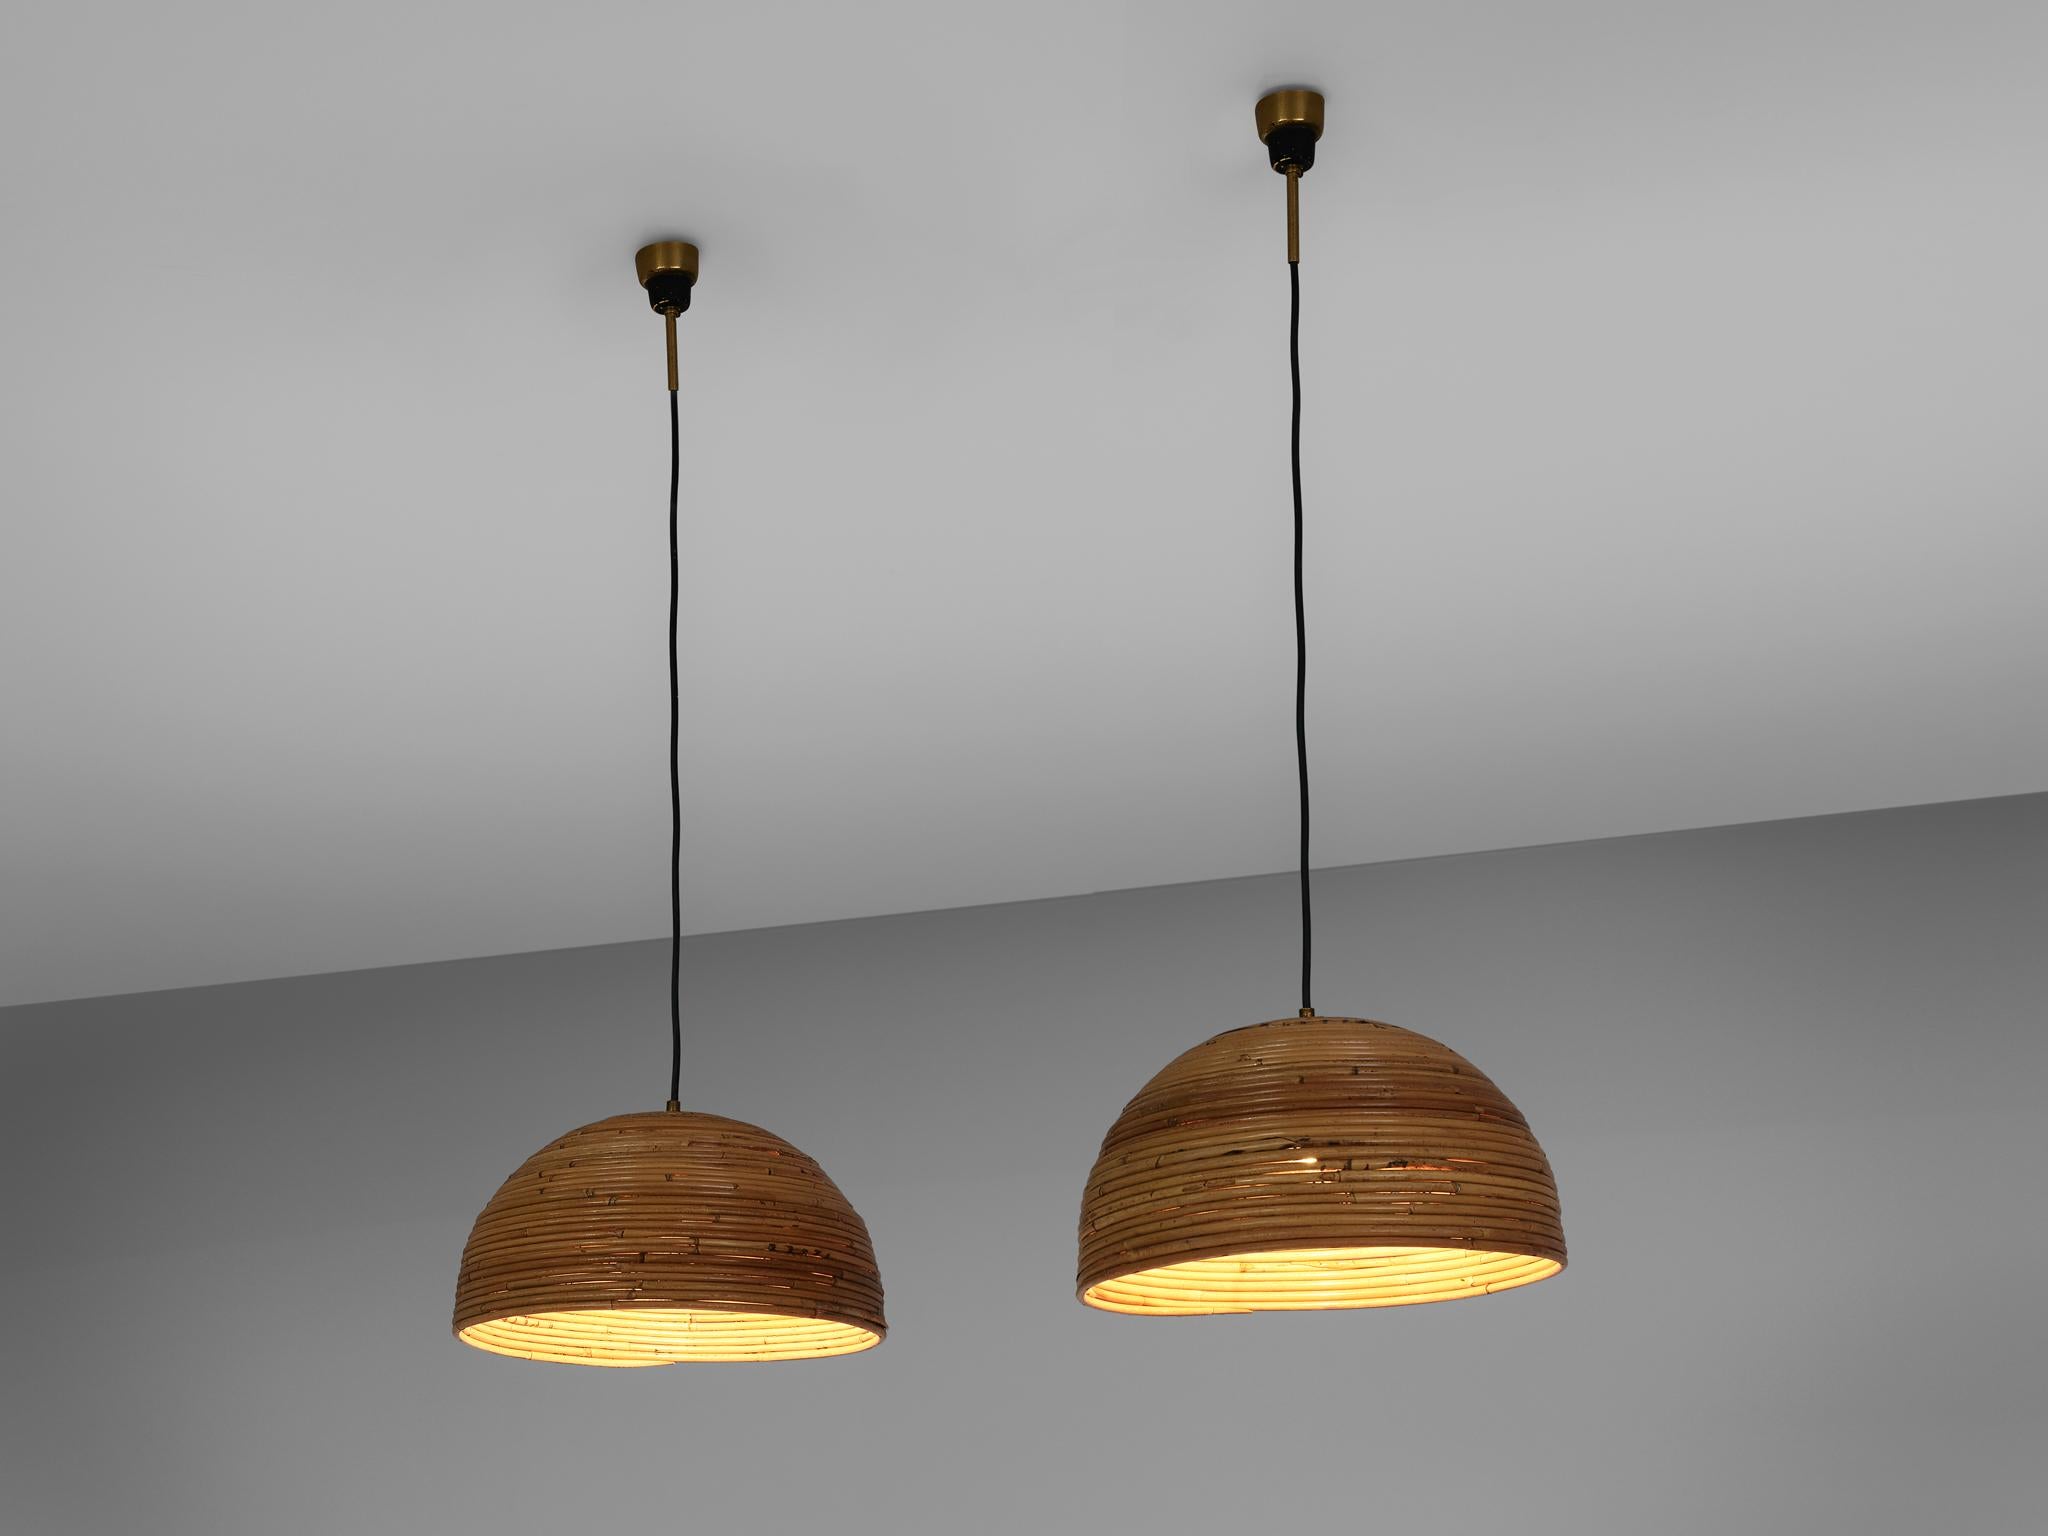 Pair of dome pendants, bamboo bentwood, brass, Europe, 1960s

This chandeliers are made out of bentwood bamboo which is layered horizontally and forms a dome shape light. The warm color of the natural material presents a soft lighting indoors as